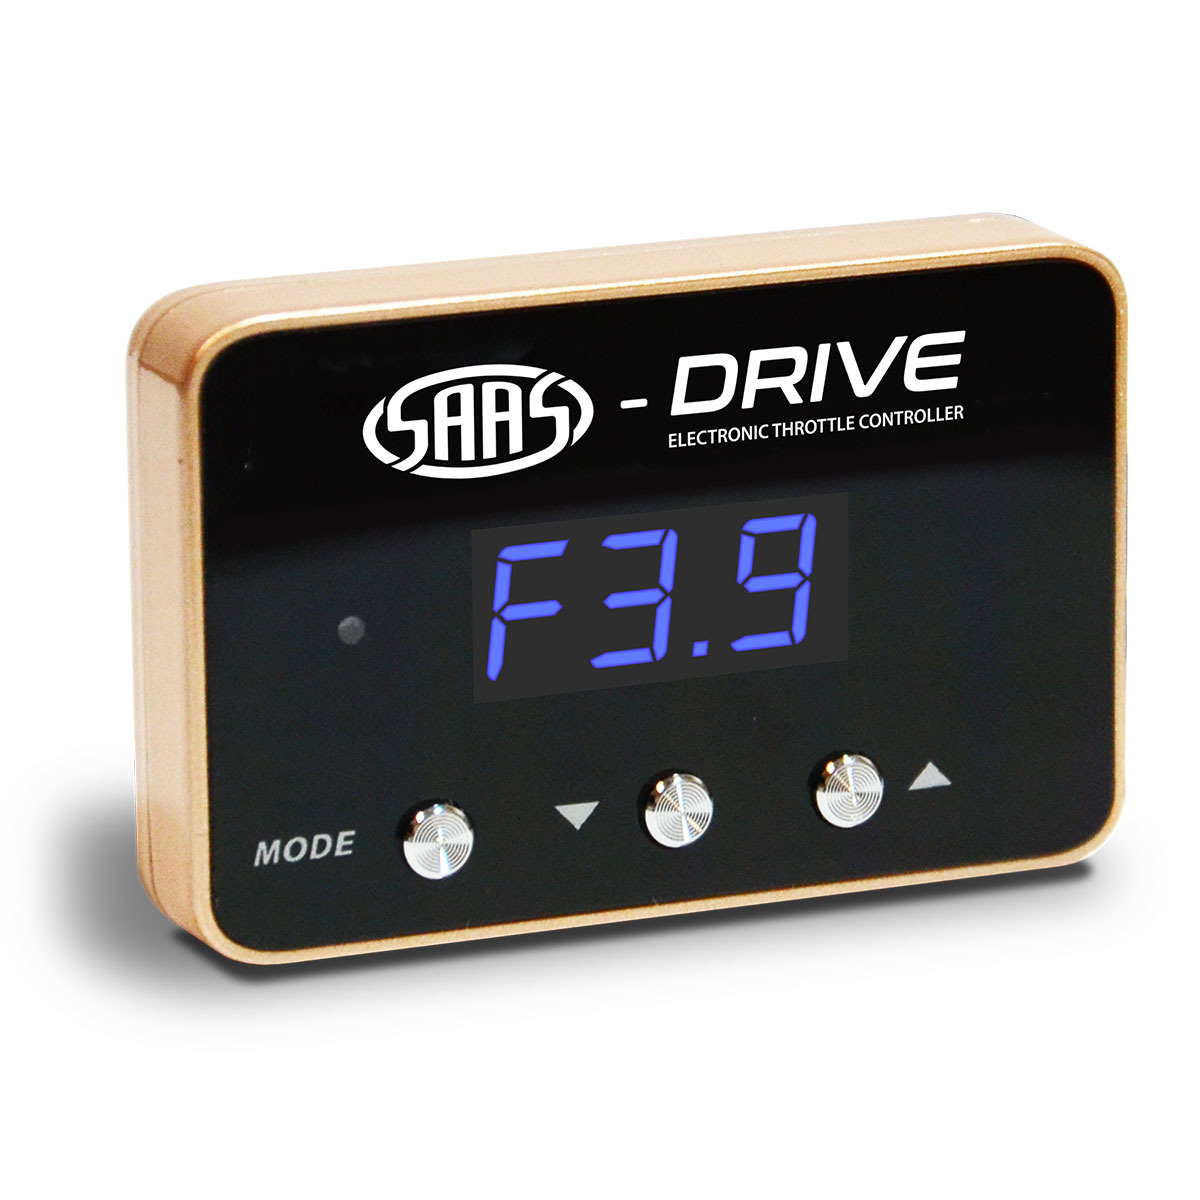 SAAS-Drive Dongfeng Joyear Throttle Controller 